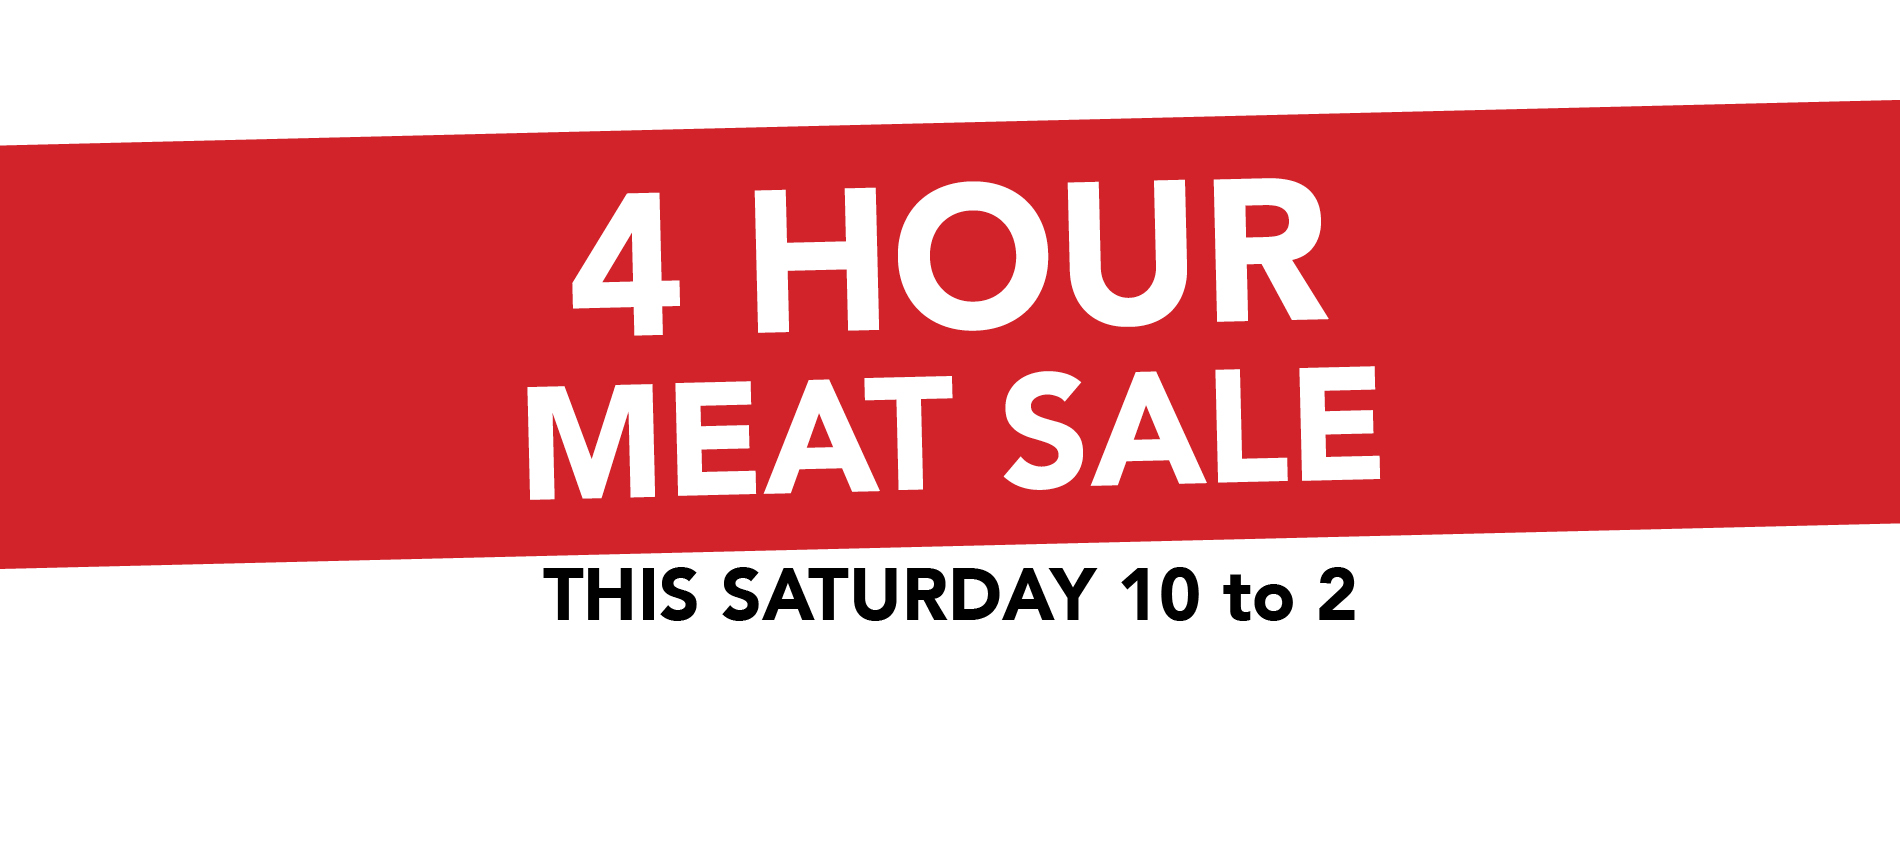 4 Hour Meat Sale - This Saturday!